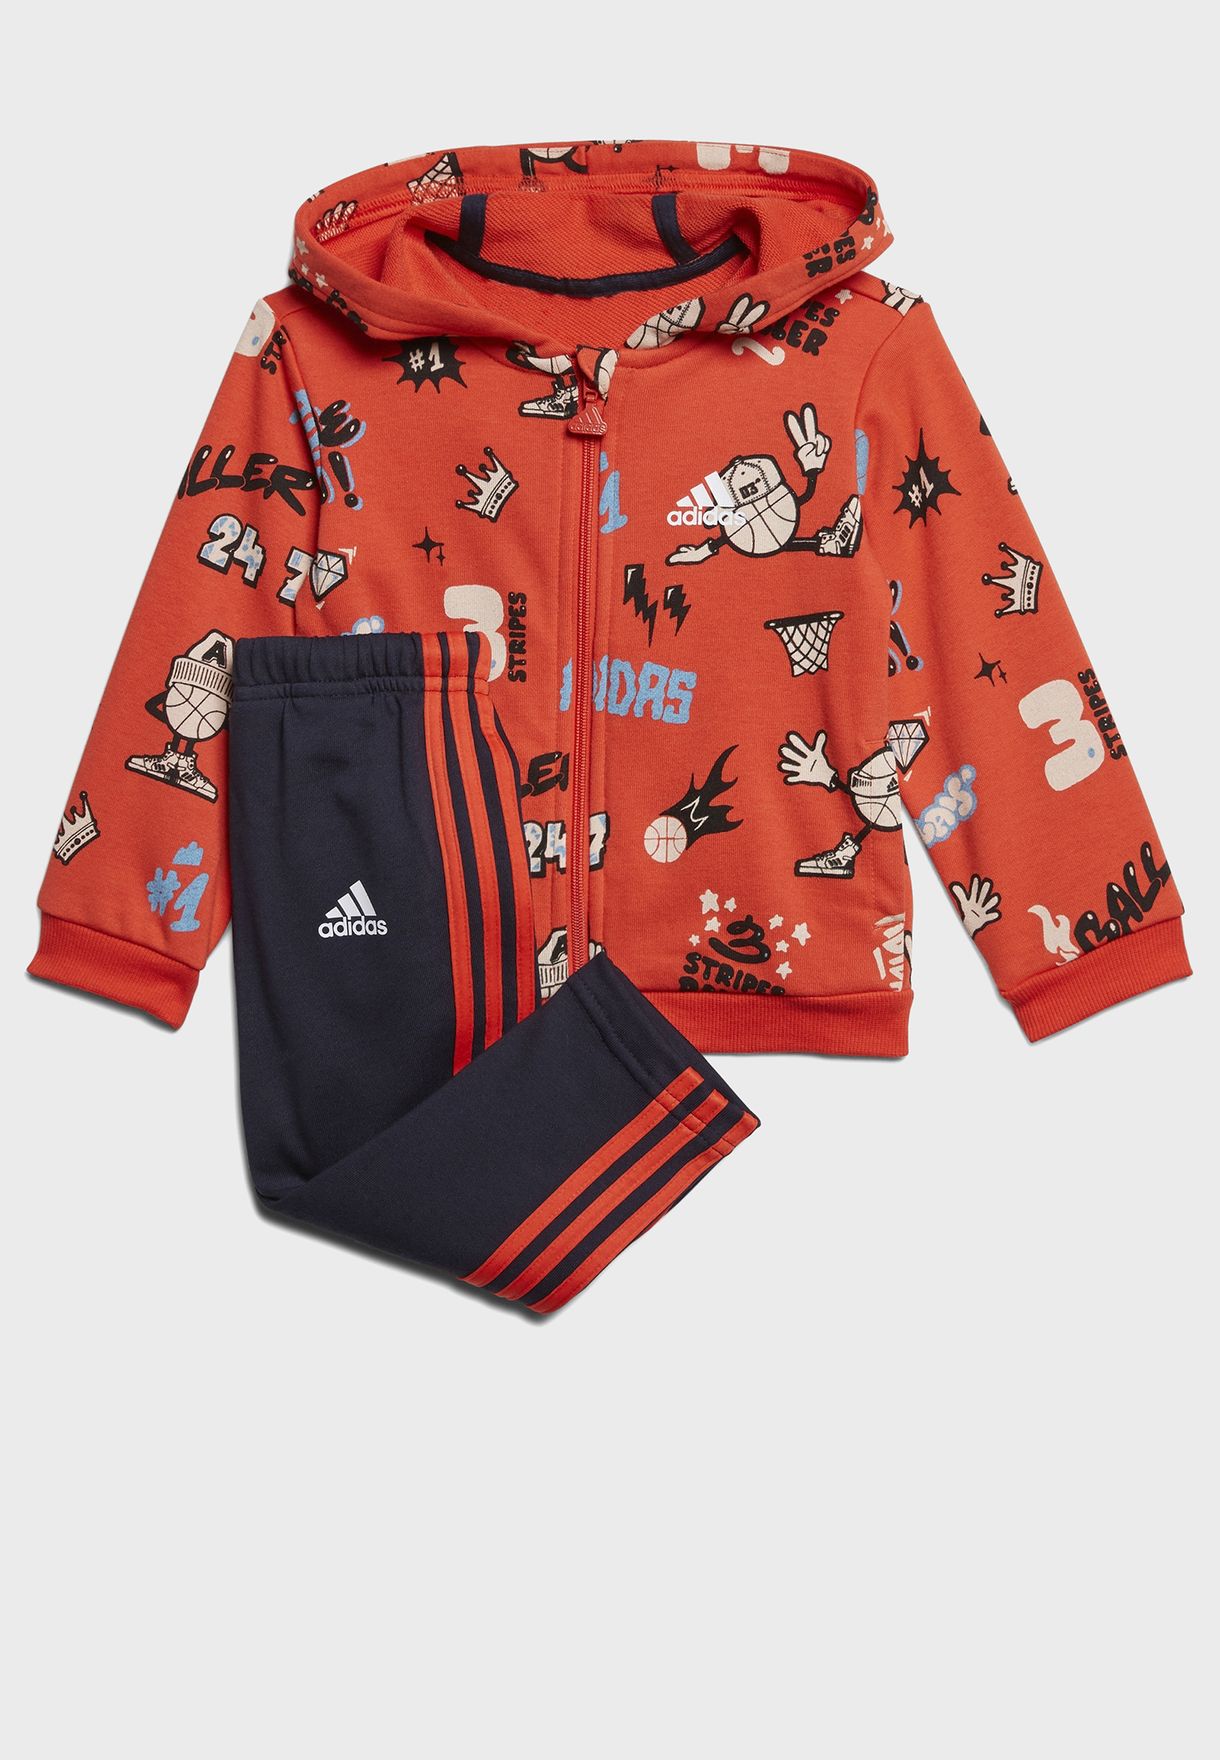 womens adidas hooded tracksuit